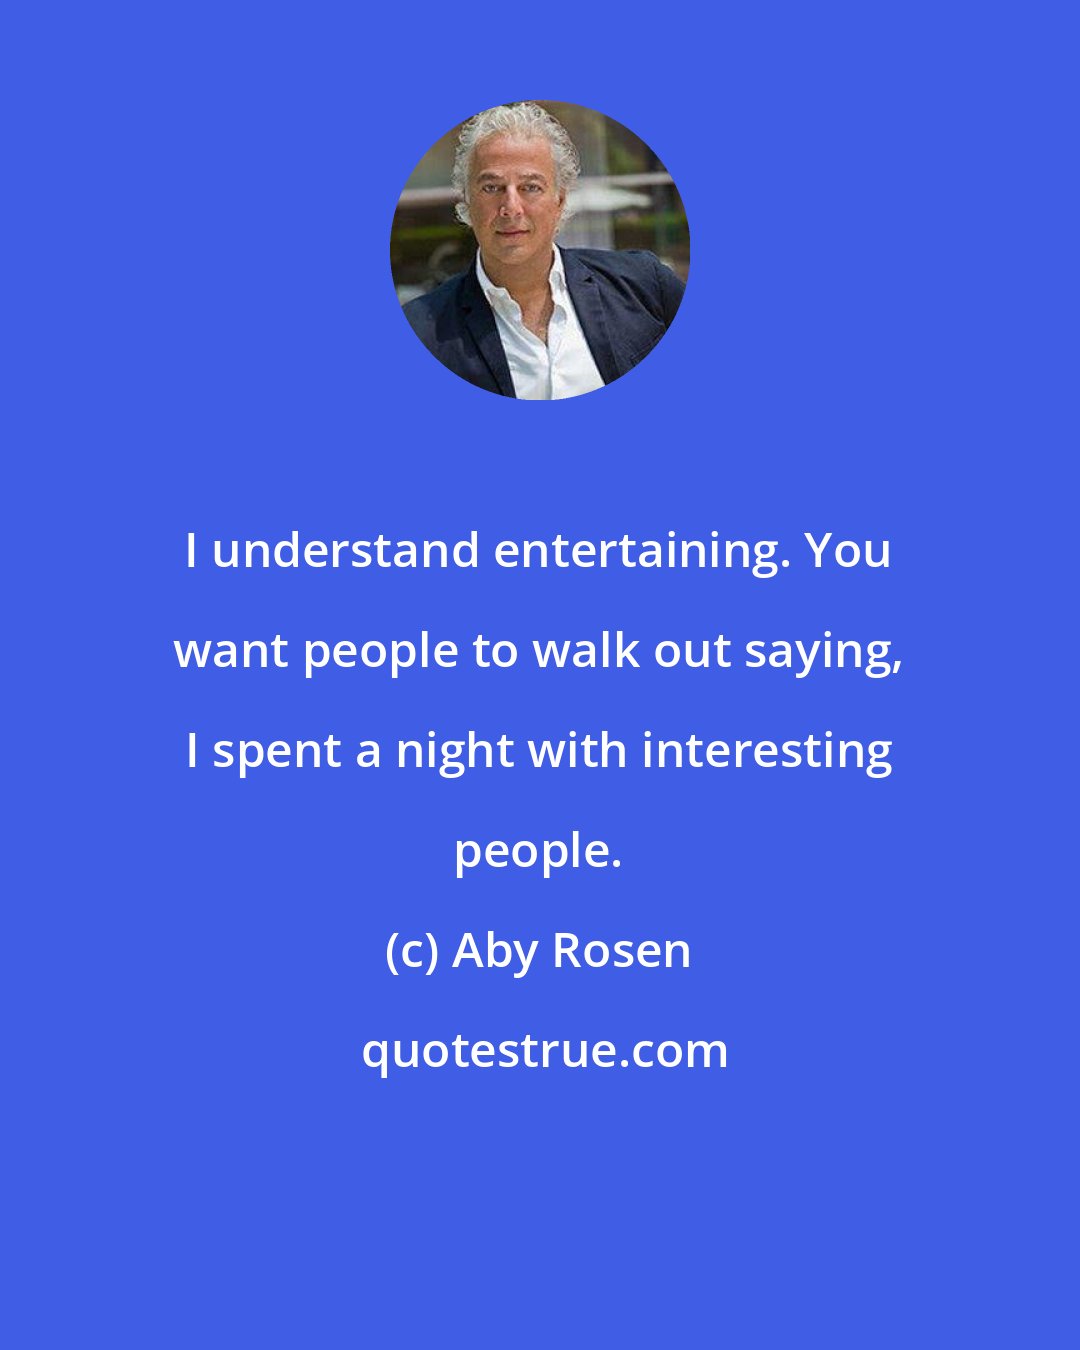 Aby Rosen: I understand entertaining. You want people to walk out saying, I spent a night with interesting people.